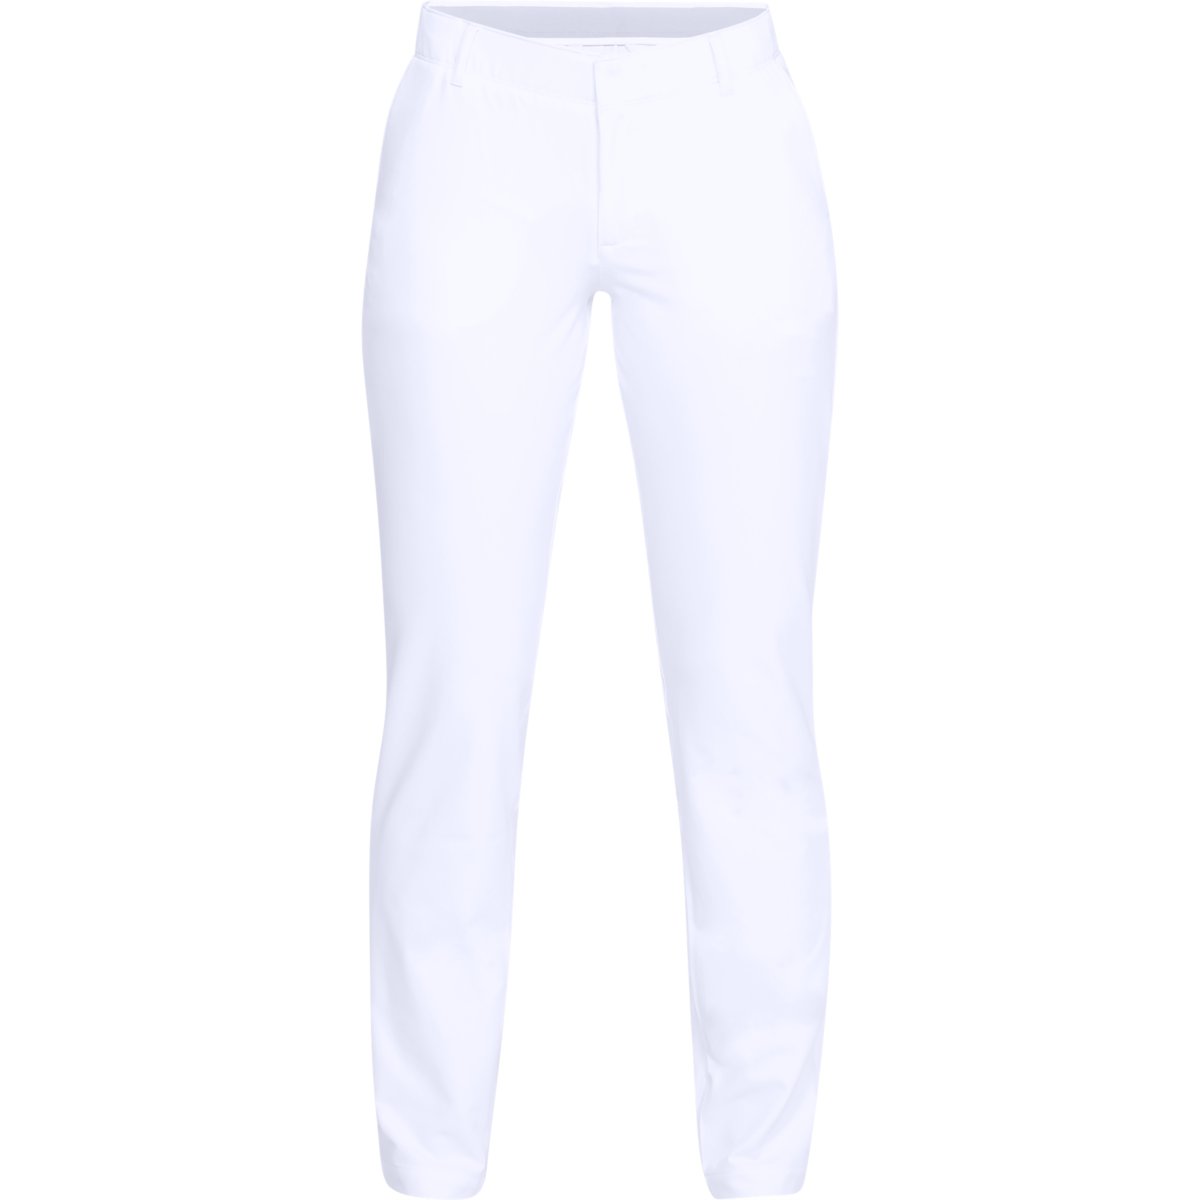 Under Armour Links Pant White – 6